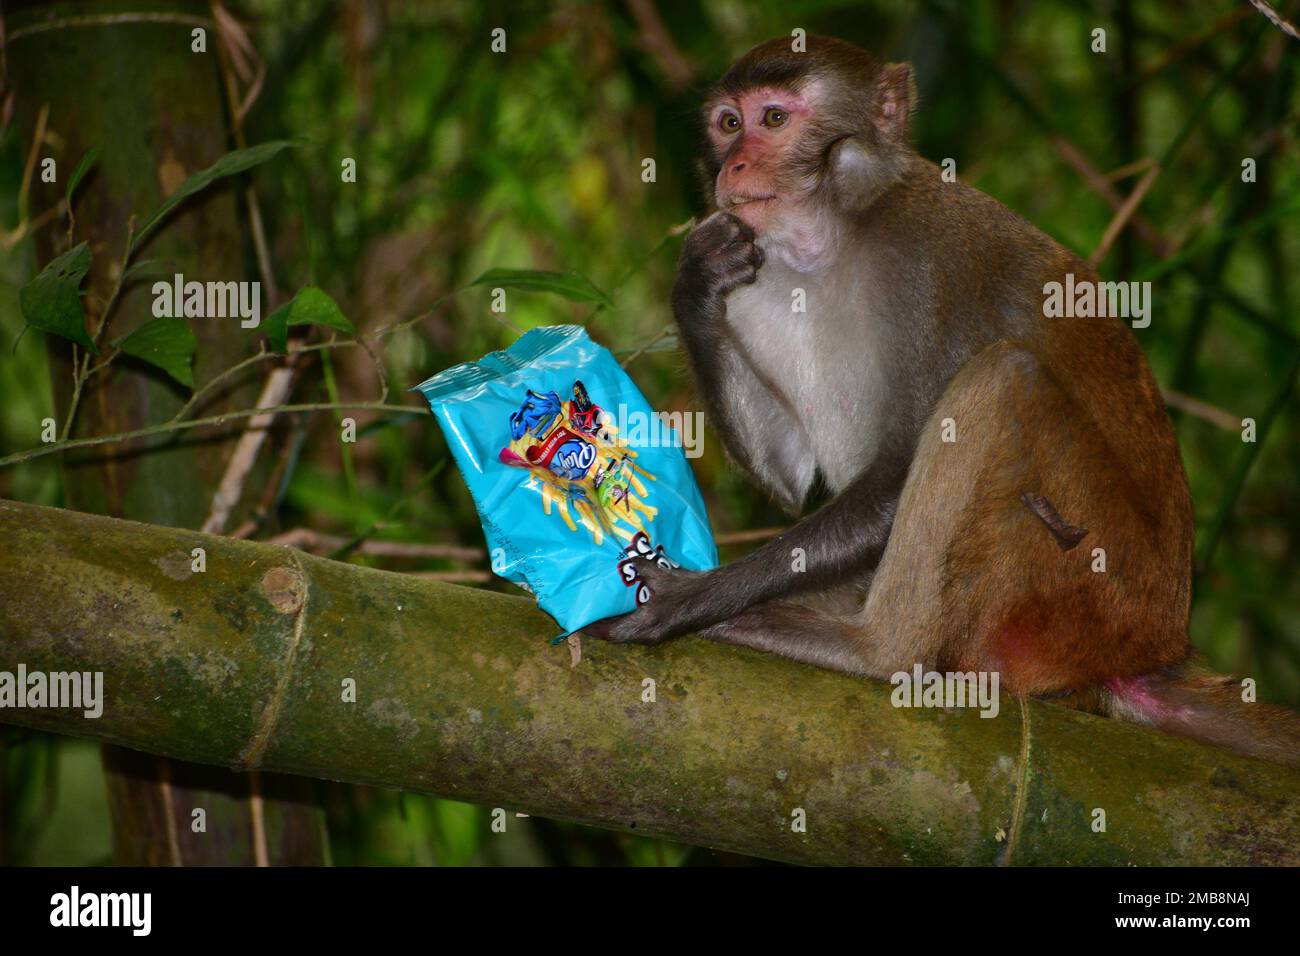 Monkey eating chips in the wild forest in Bangladesh Stock Photo